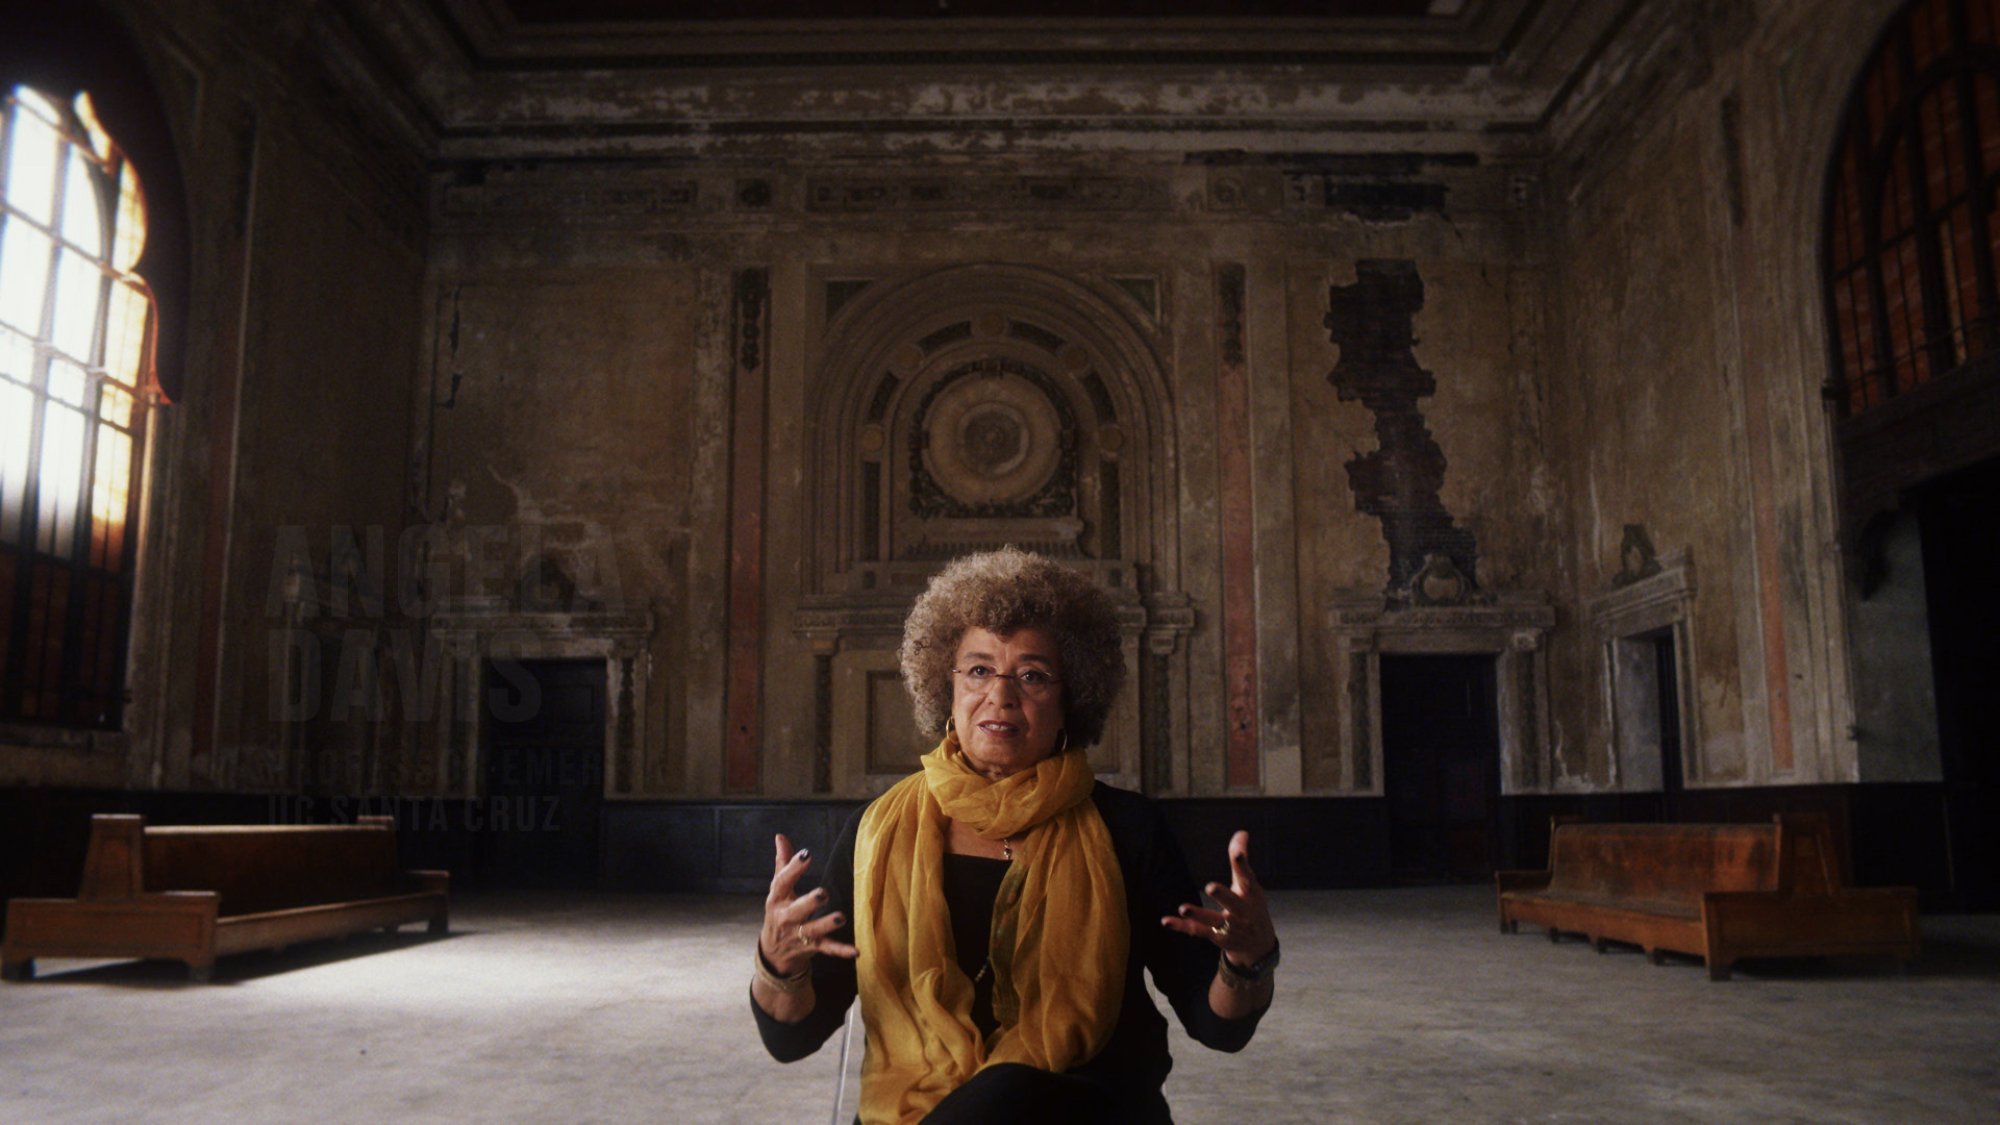 Activist and author Angela Davis sits in the middle of a large stately room in the documentary "13th"